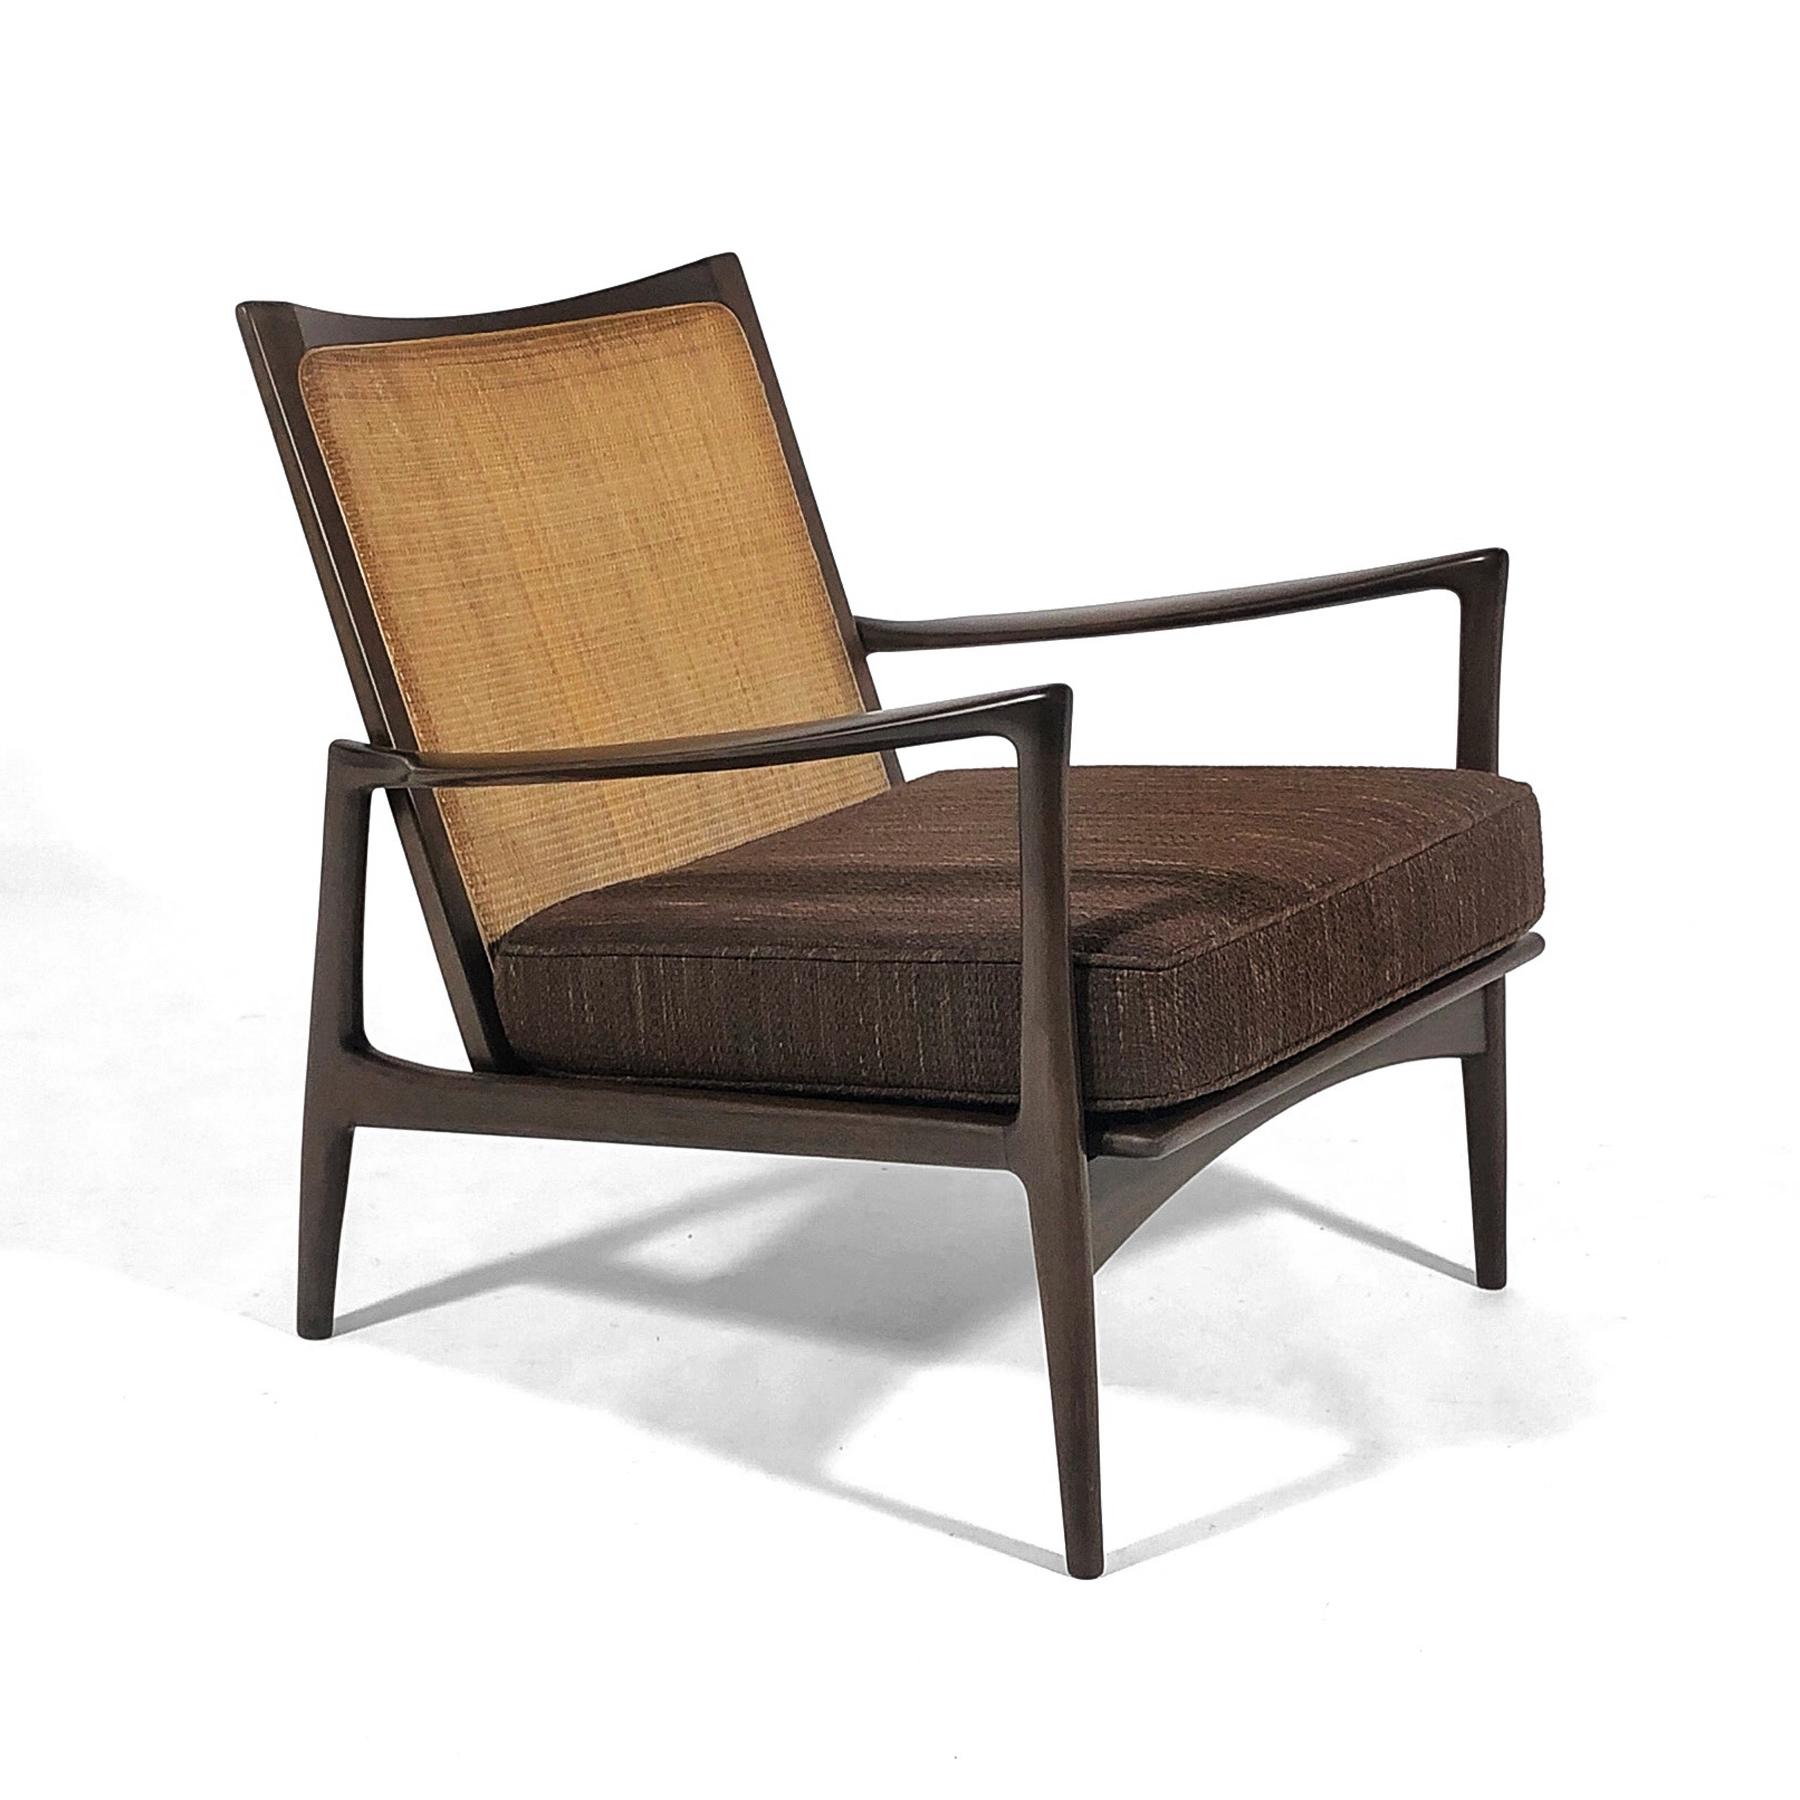 Mid-20th Century Ib Kofod-Larsen Cane-Back Lounge Chair Pair For Sale